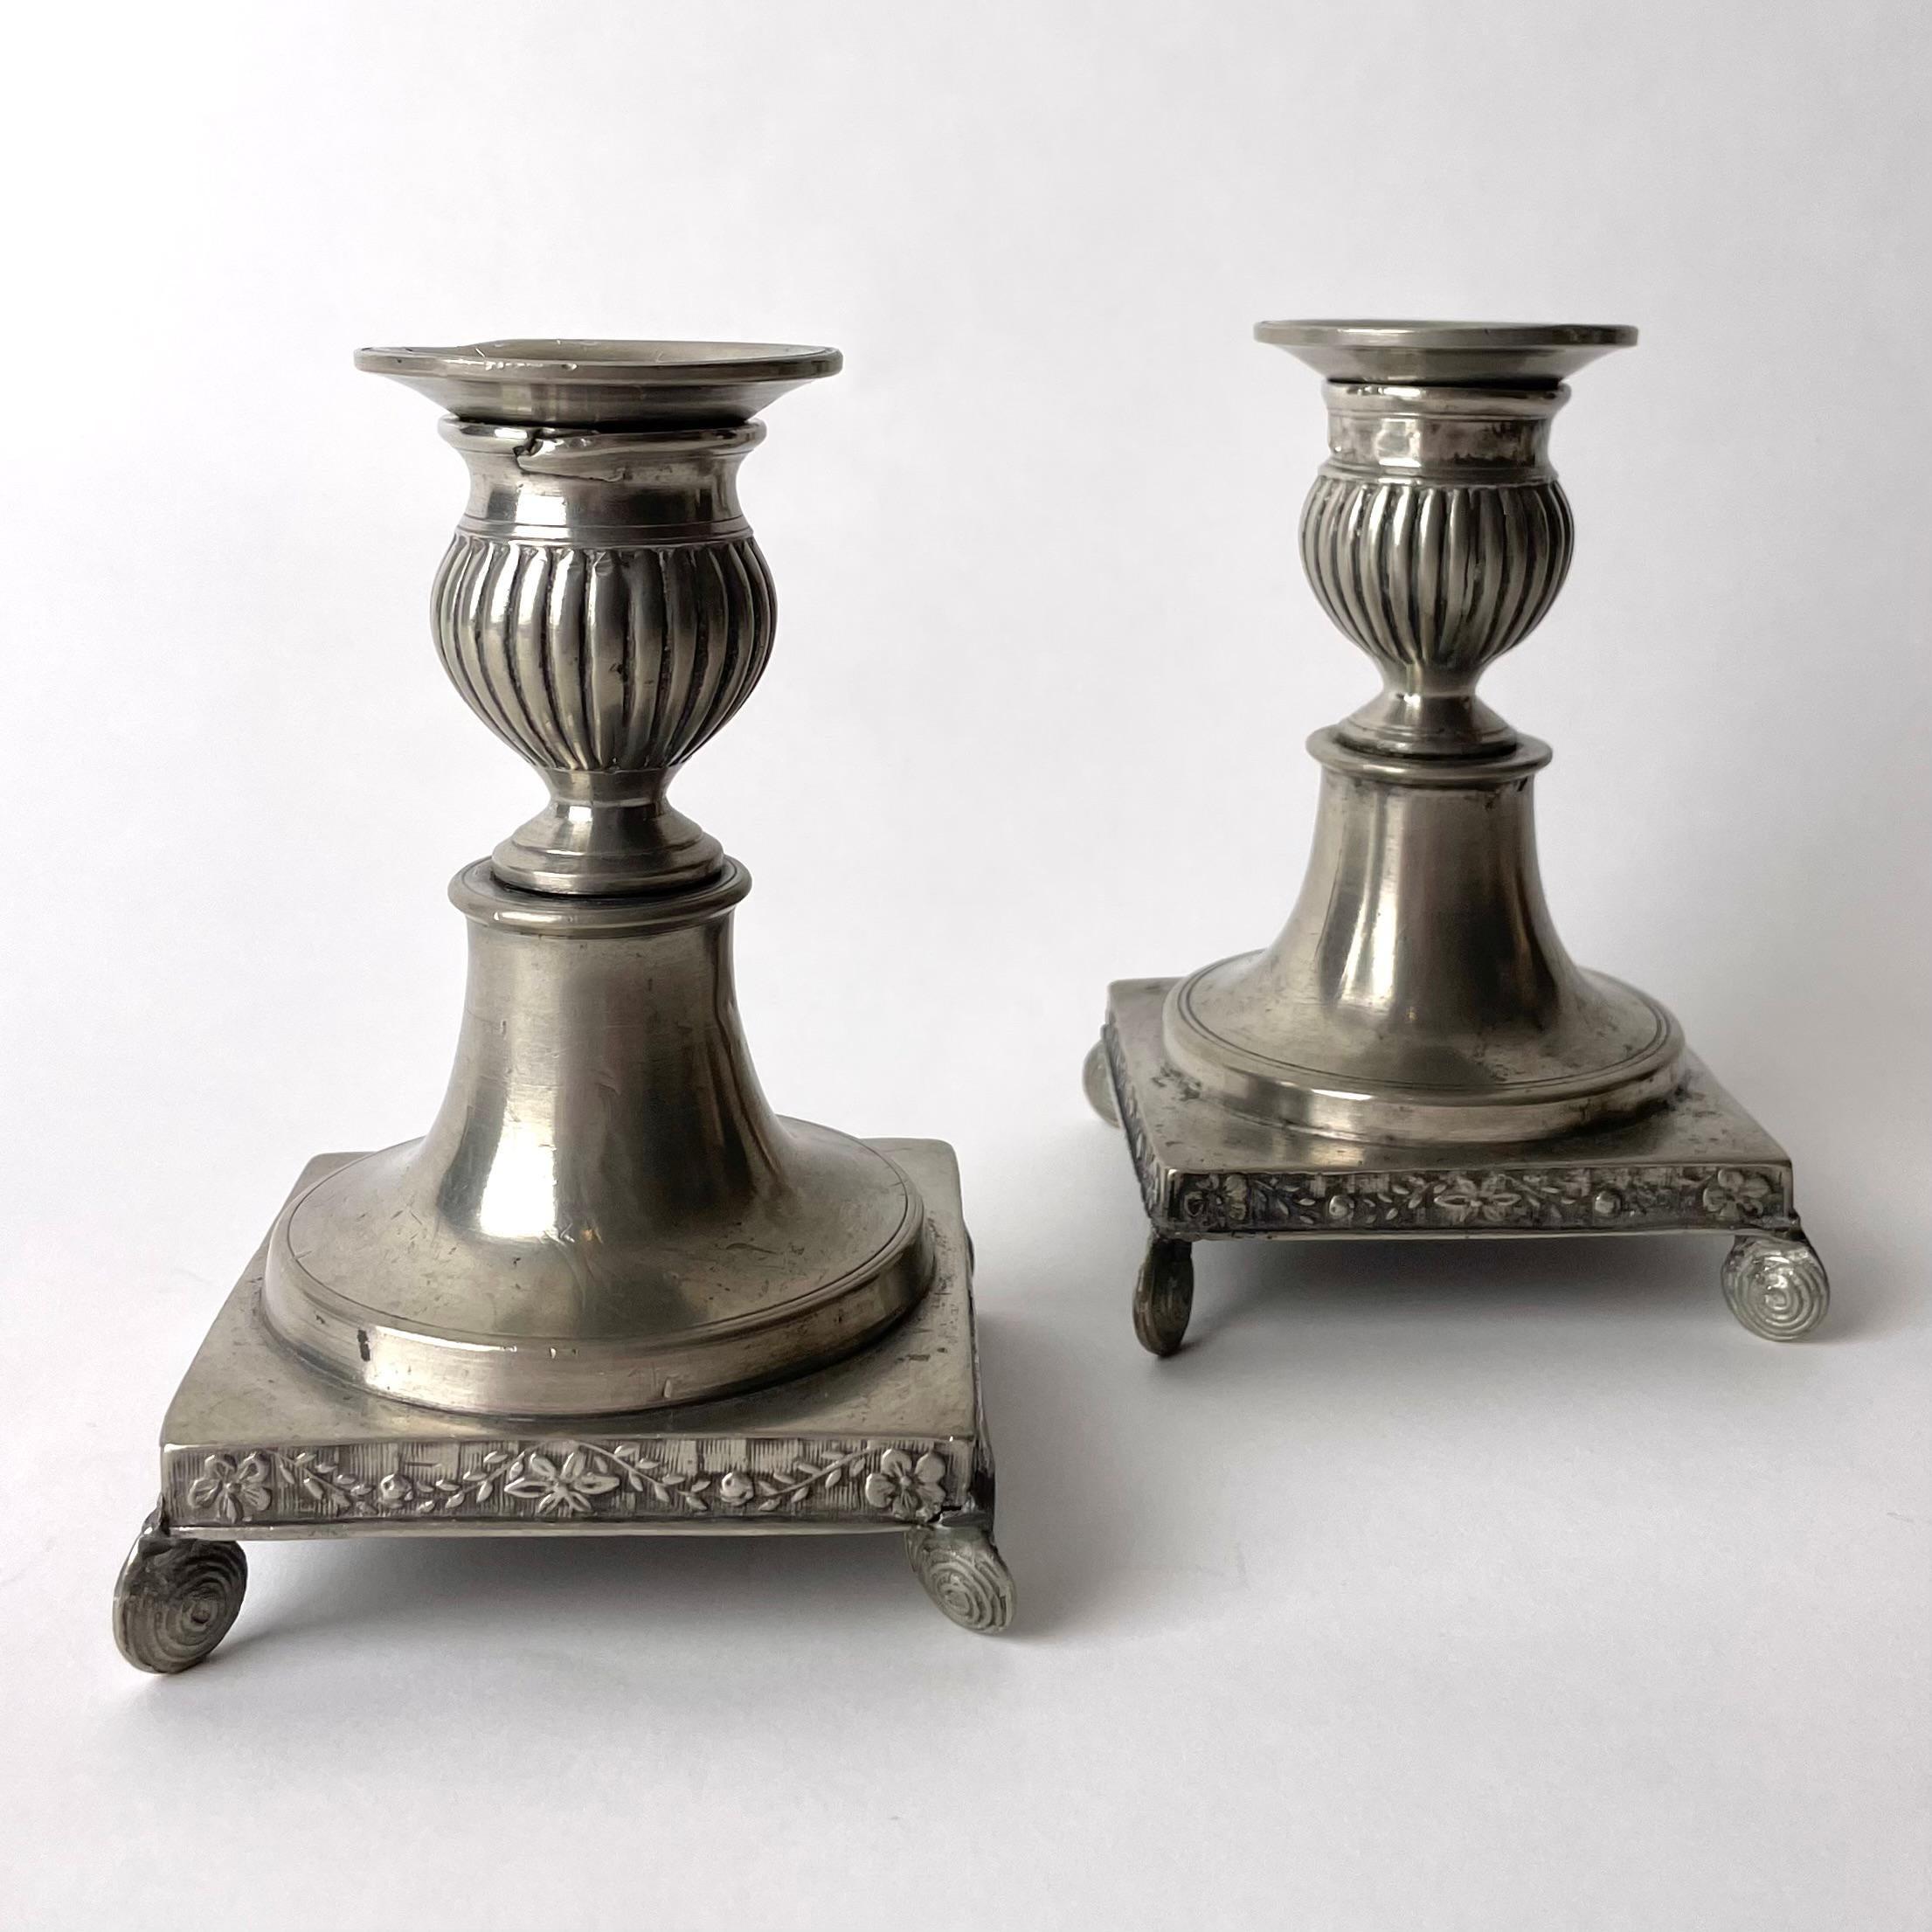 Beautiful Pair of Gustavian Pewter Candlesticks from the late 18th or early 19th Century. Period Gustavian design.

Wear consistent with age and use 